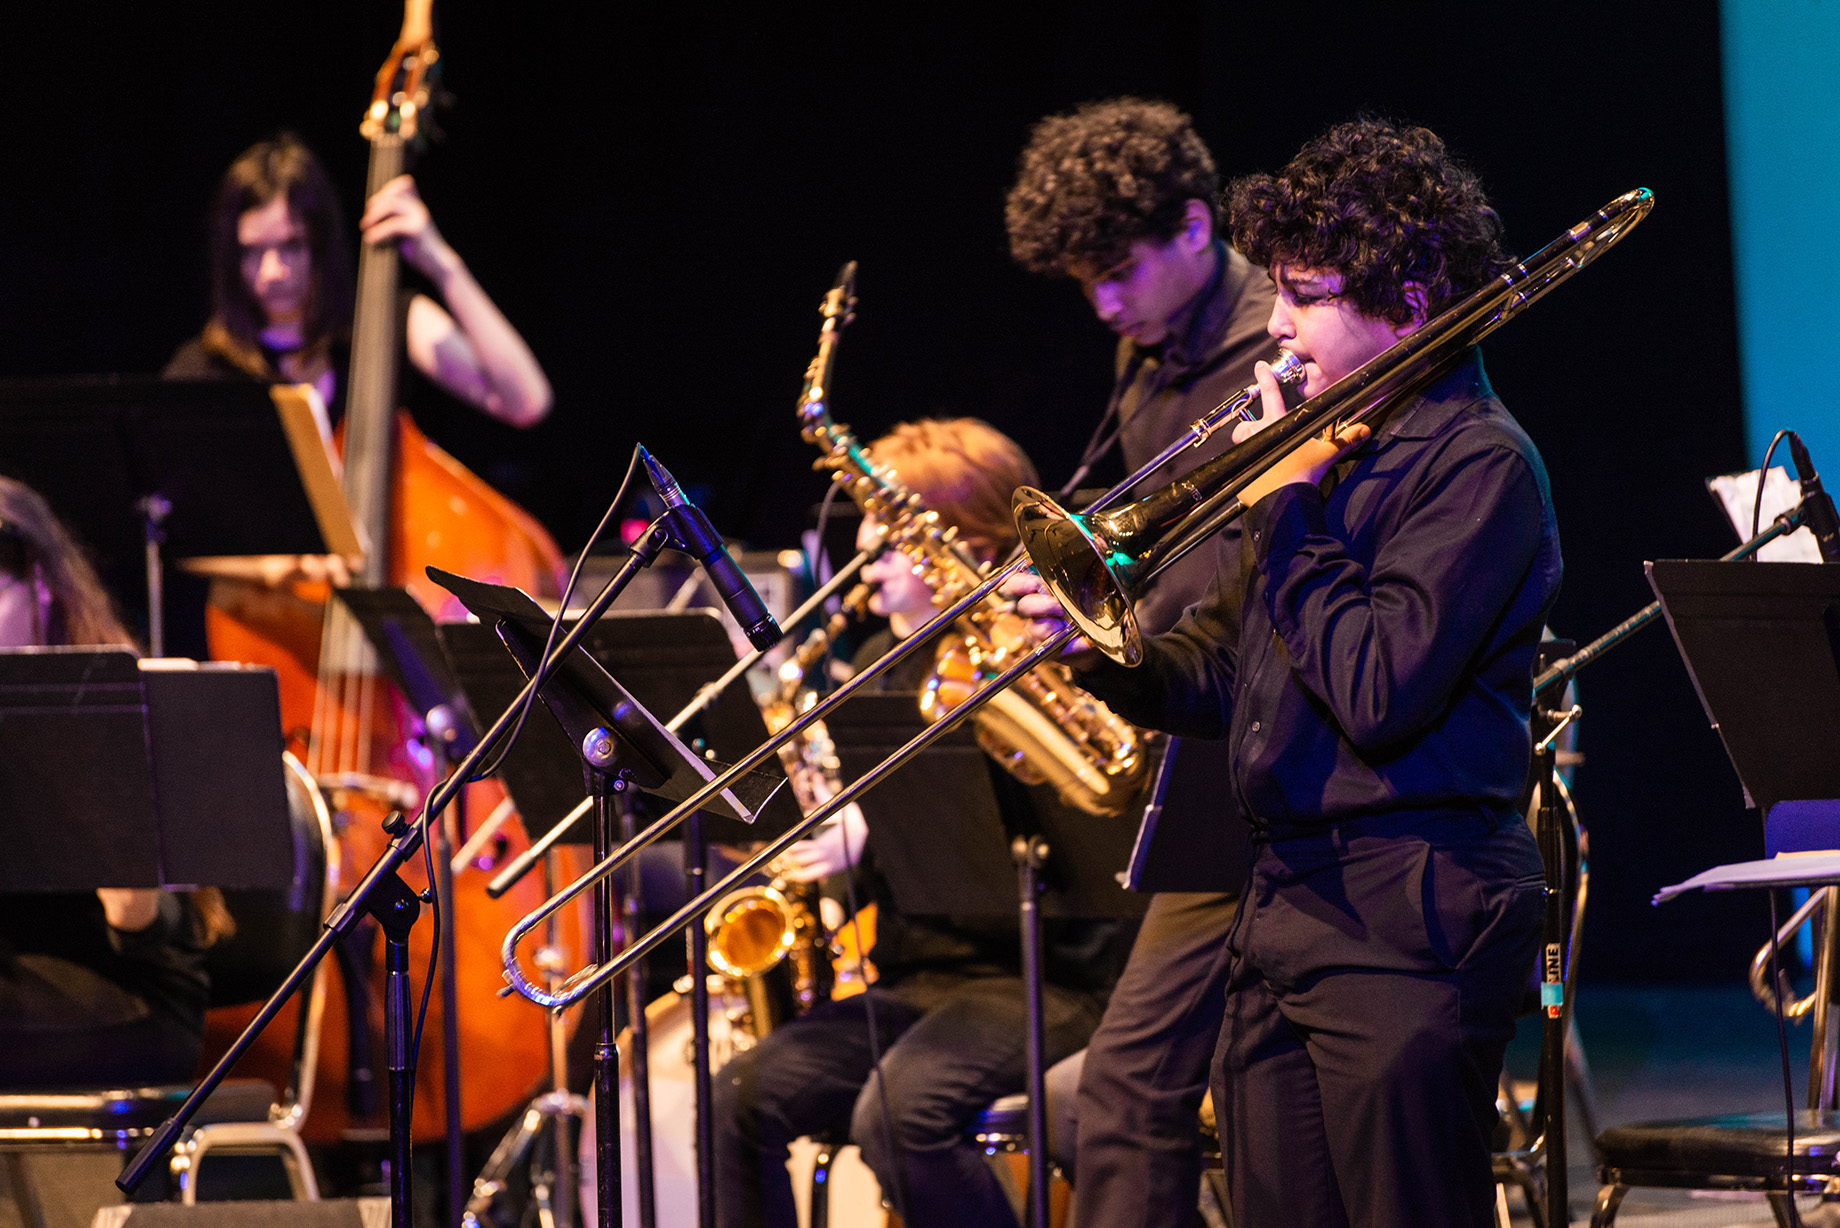 Musicians playing brass instruments on stage